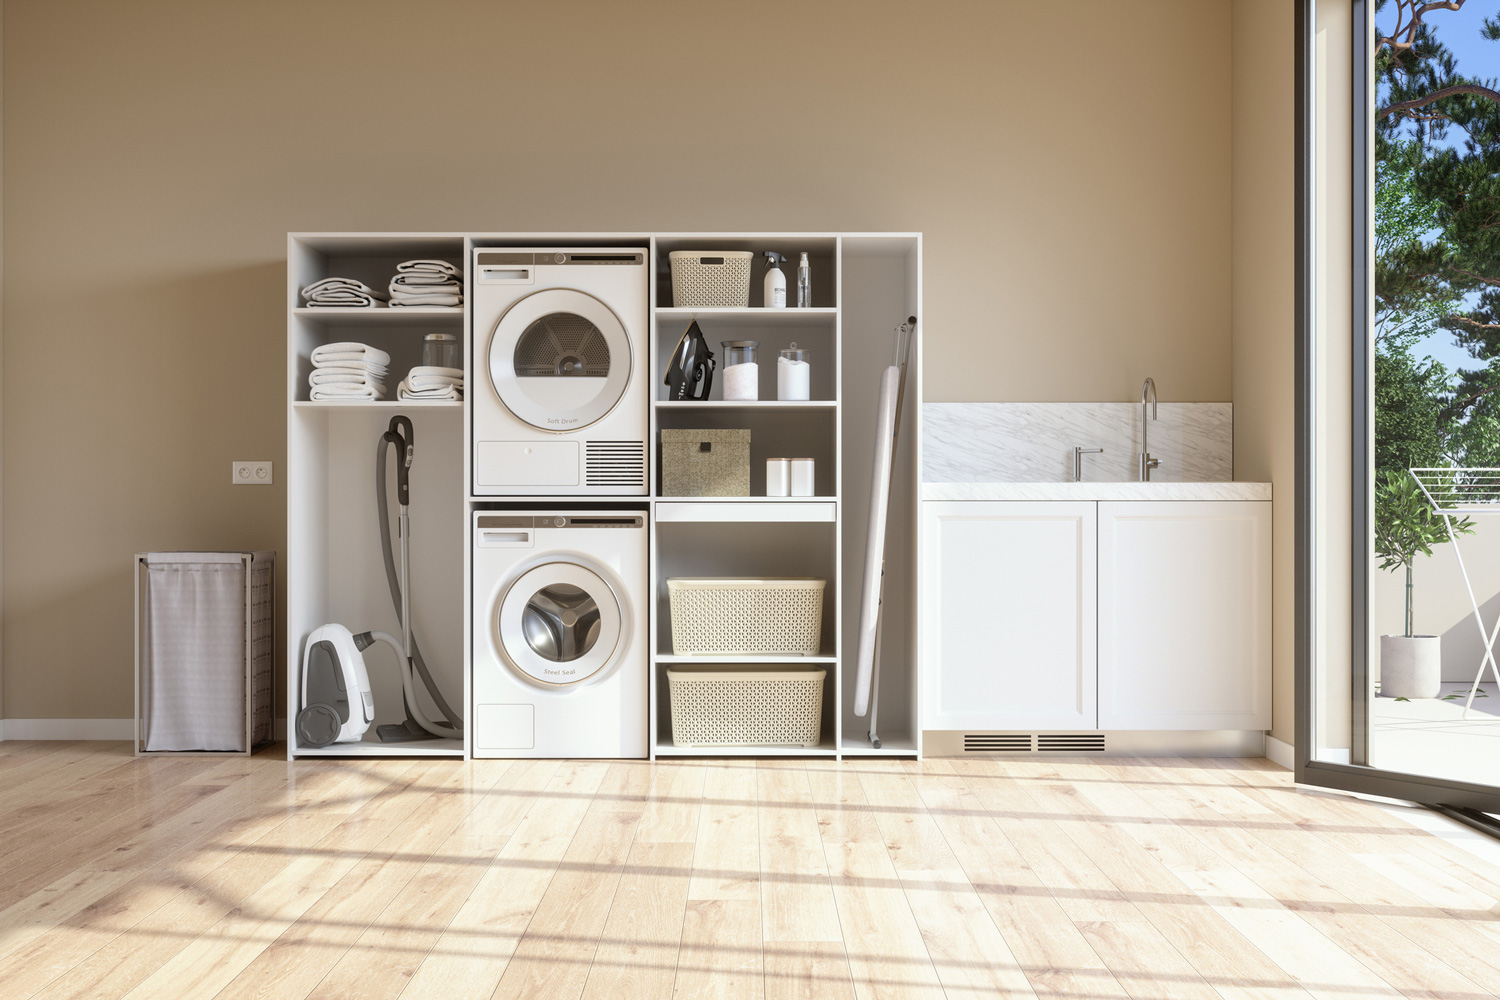 Laundry Room With Beige Wall And Parquet Floor With Washing Machine, Dryer, Laundry Basket And Folded Towels In The Cabinet.